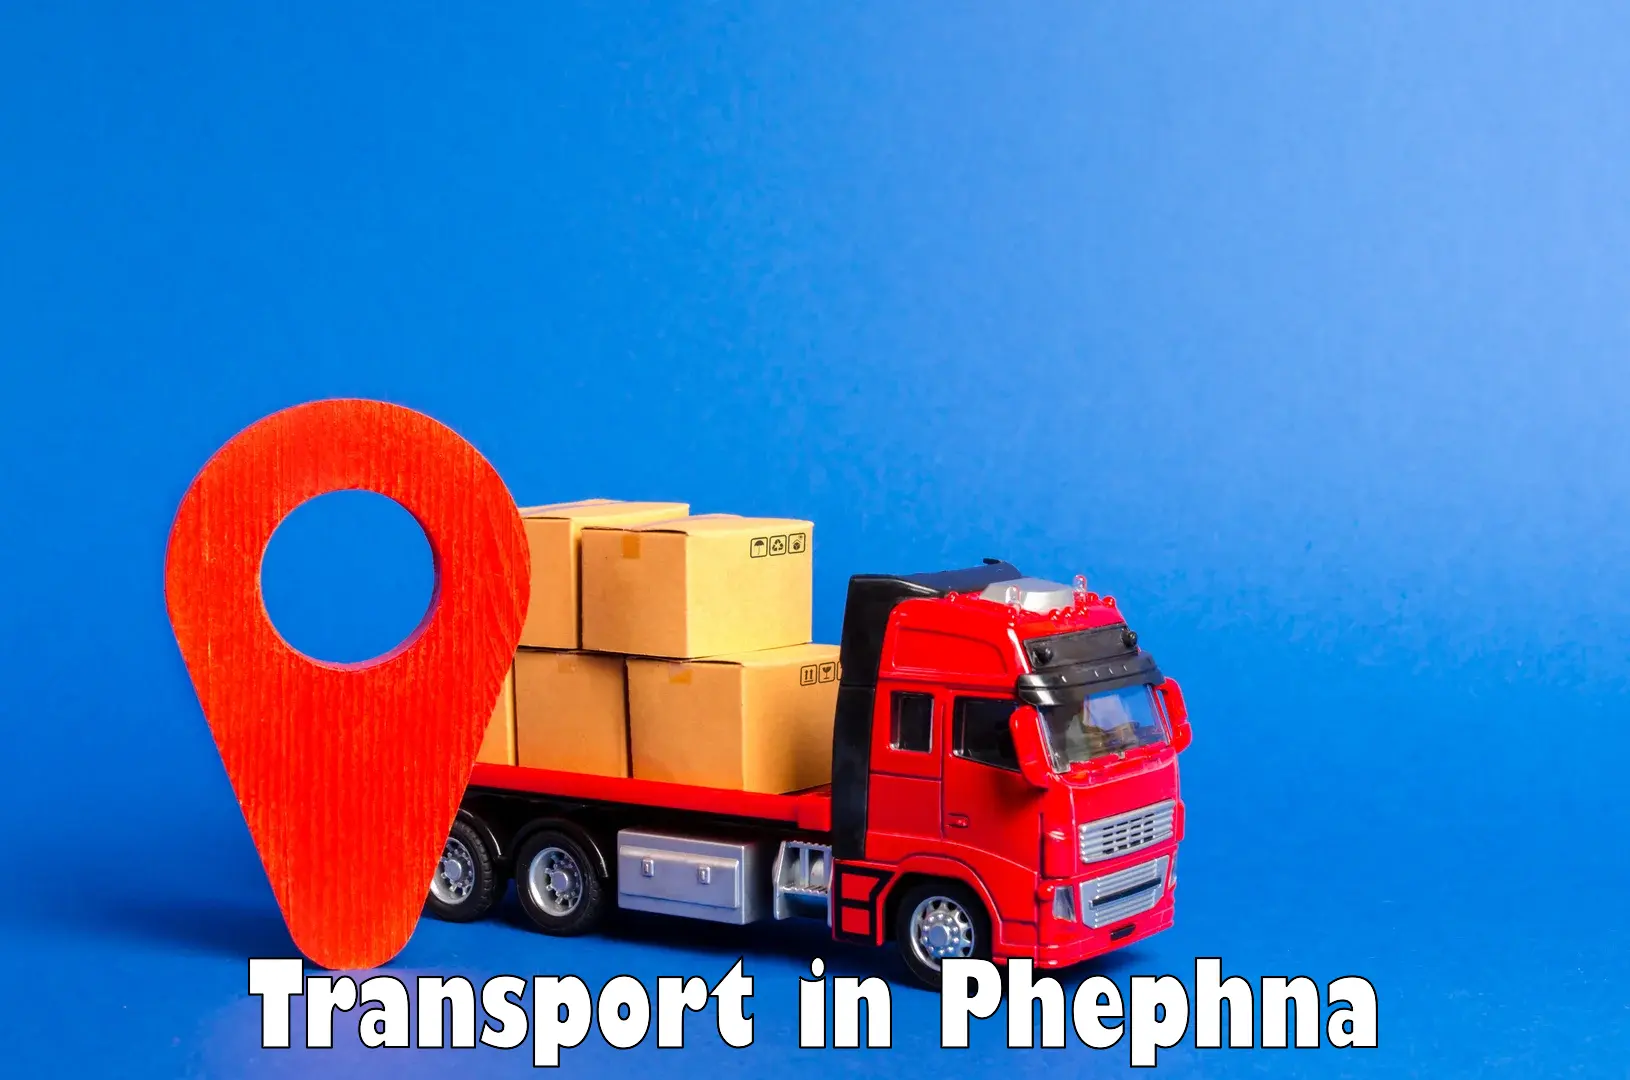 Nationwide transport services in Phephna